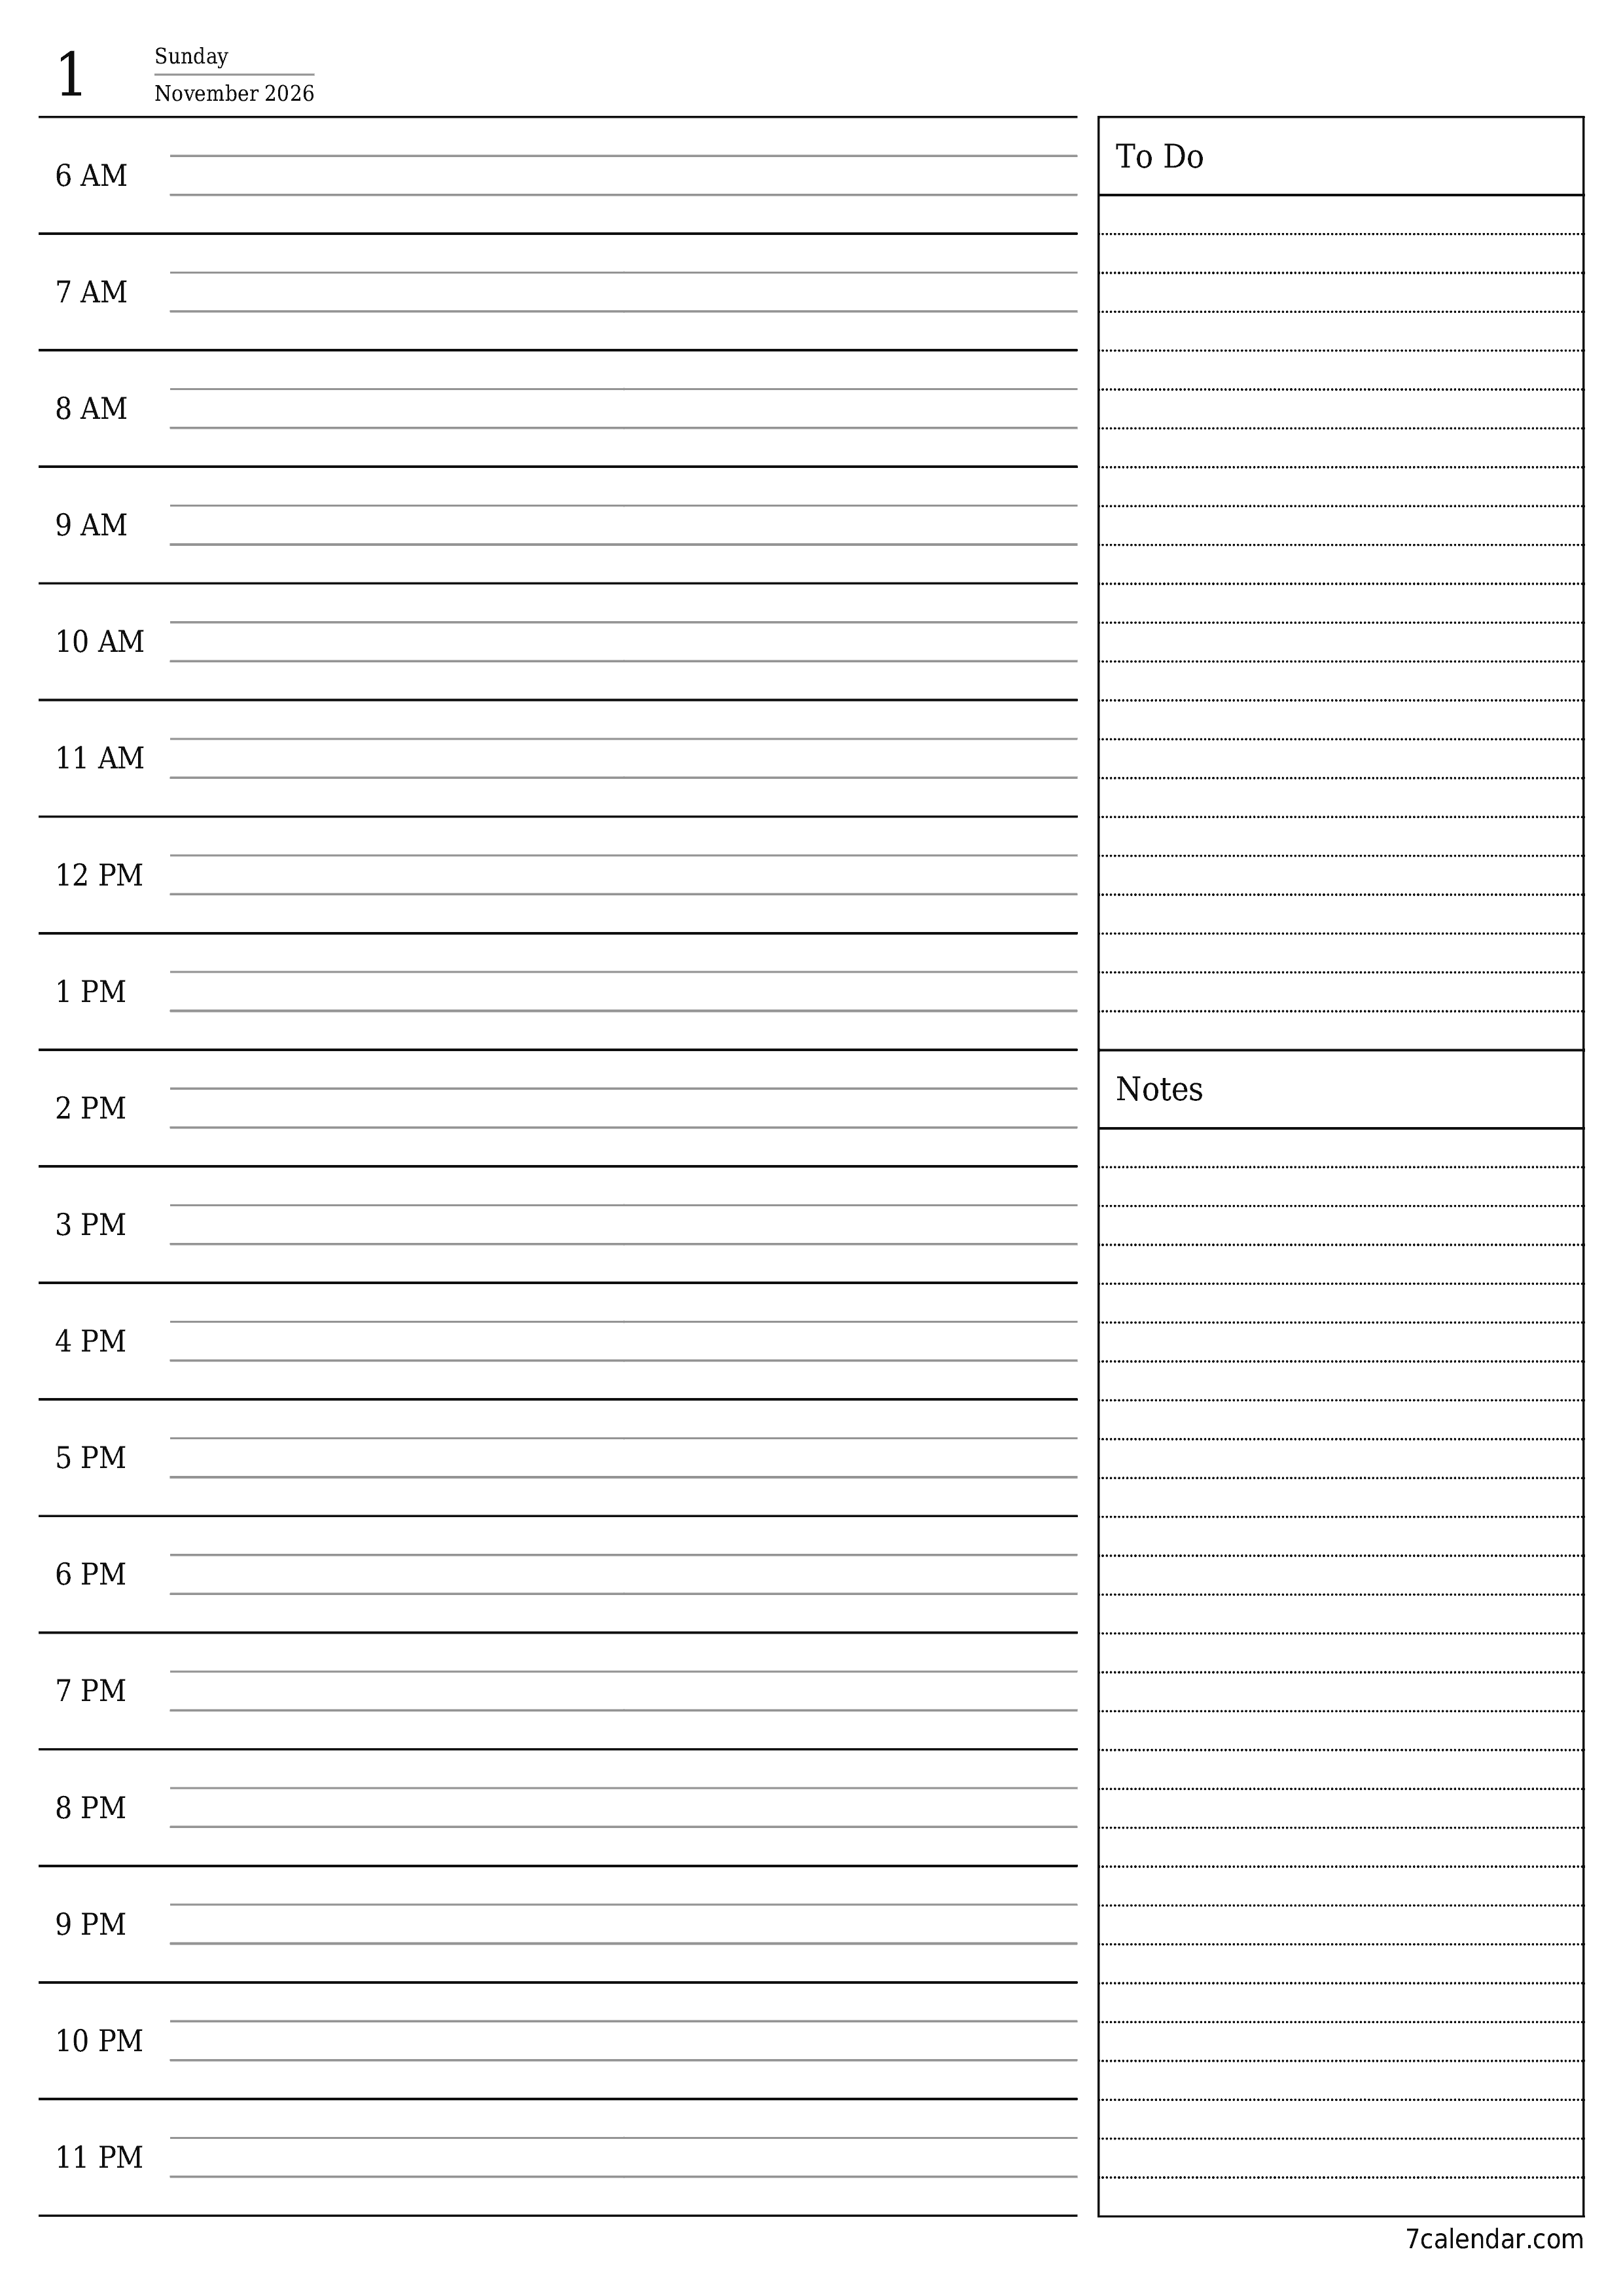 Blank daily printable calendar and planner for day November 2026 with notes, save and print to PDF PNG English